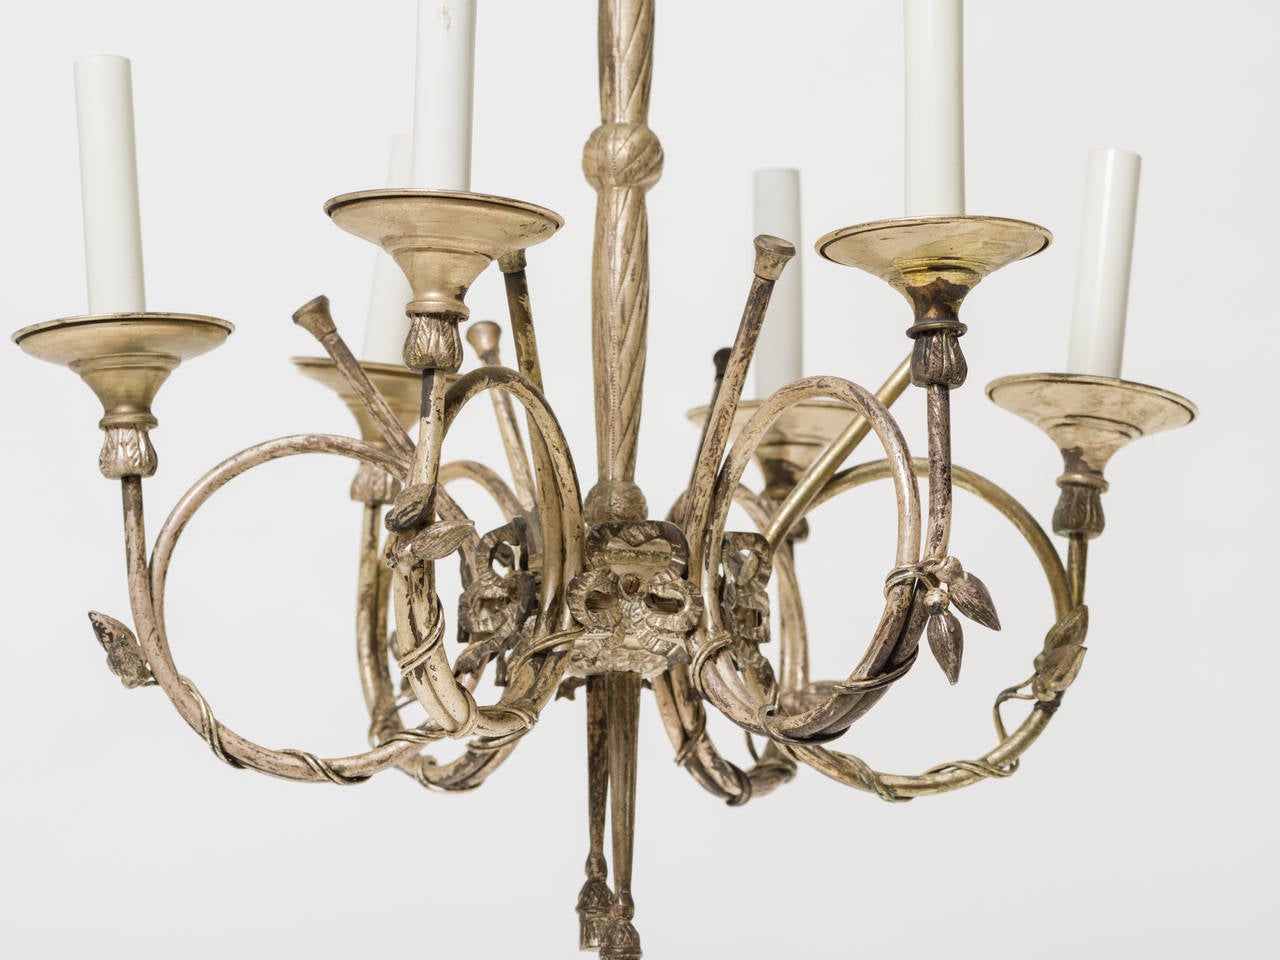 French style six-arm silvered chandelier. It has French horn shaped arms.